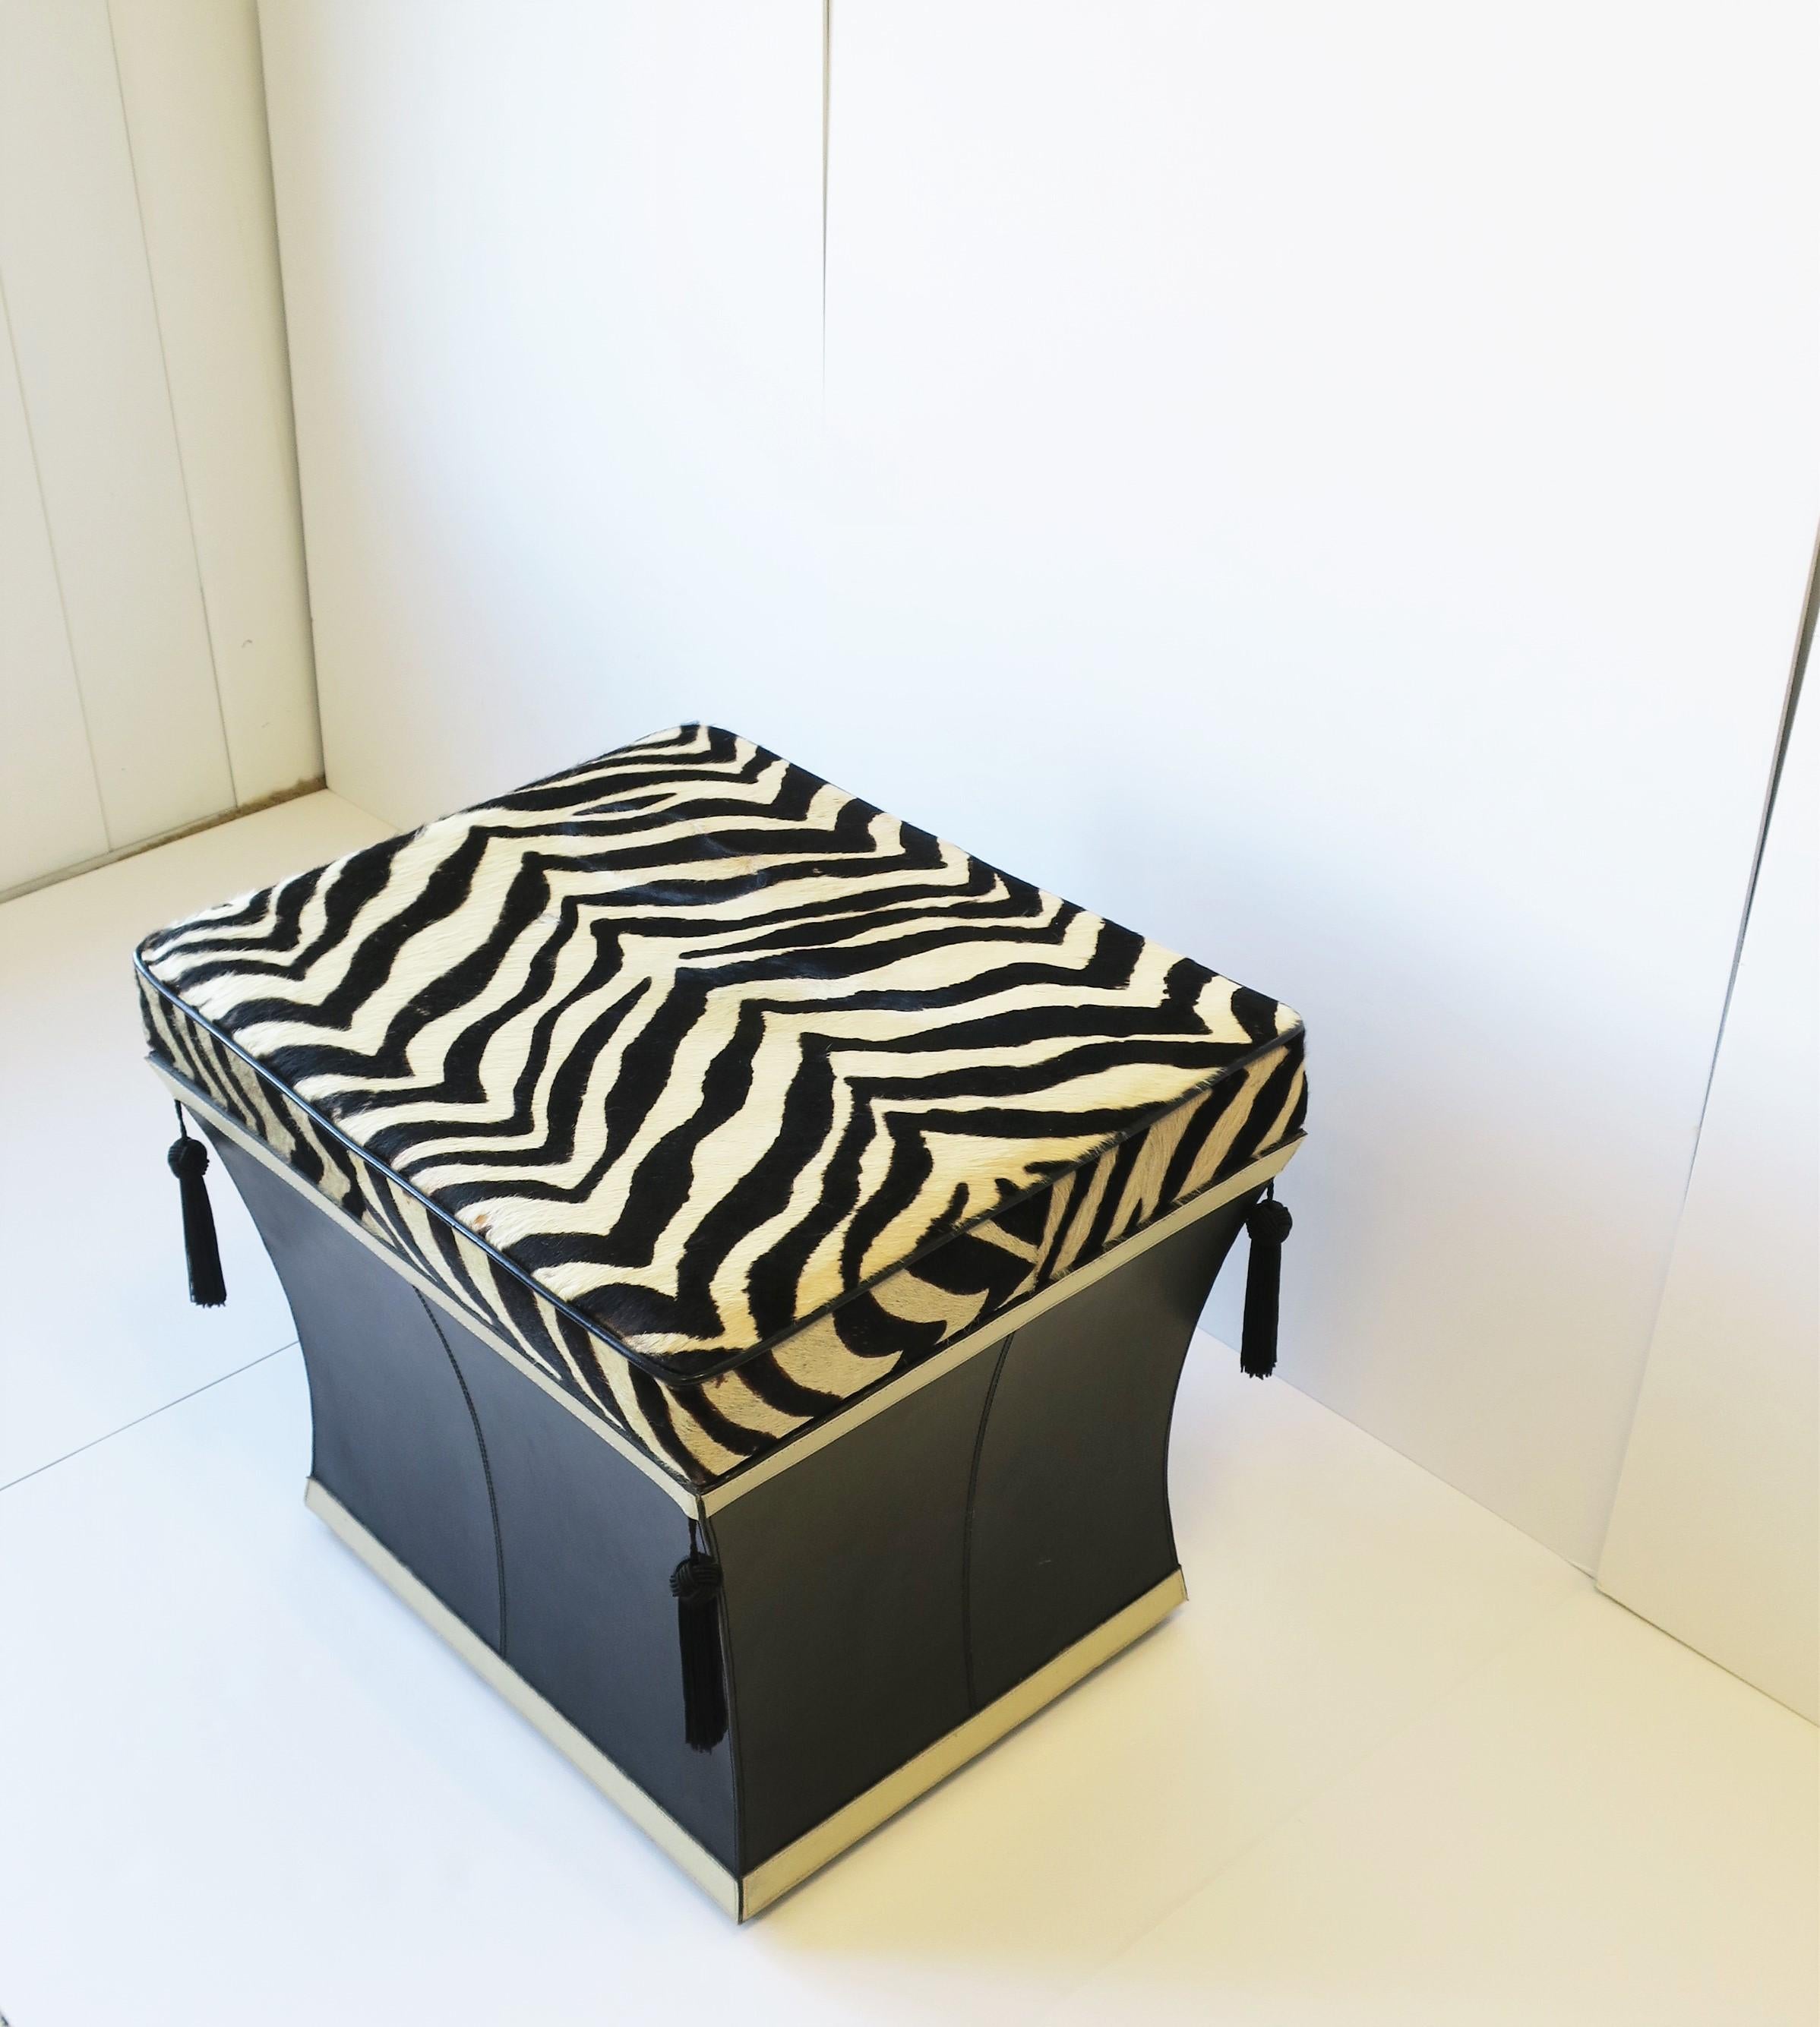 20th Century Zebra Hide Bench Stool with Storage Trunk and Tassels, circa 1980s 1990s For Sale